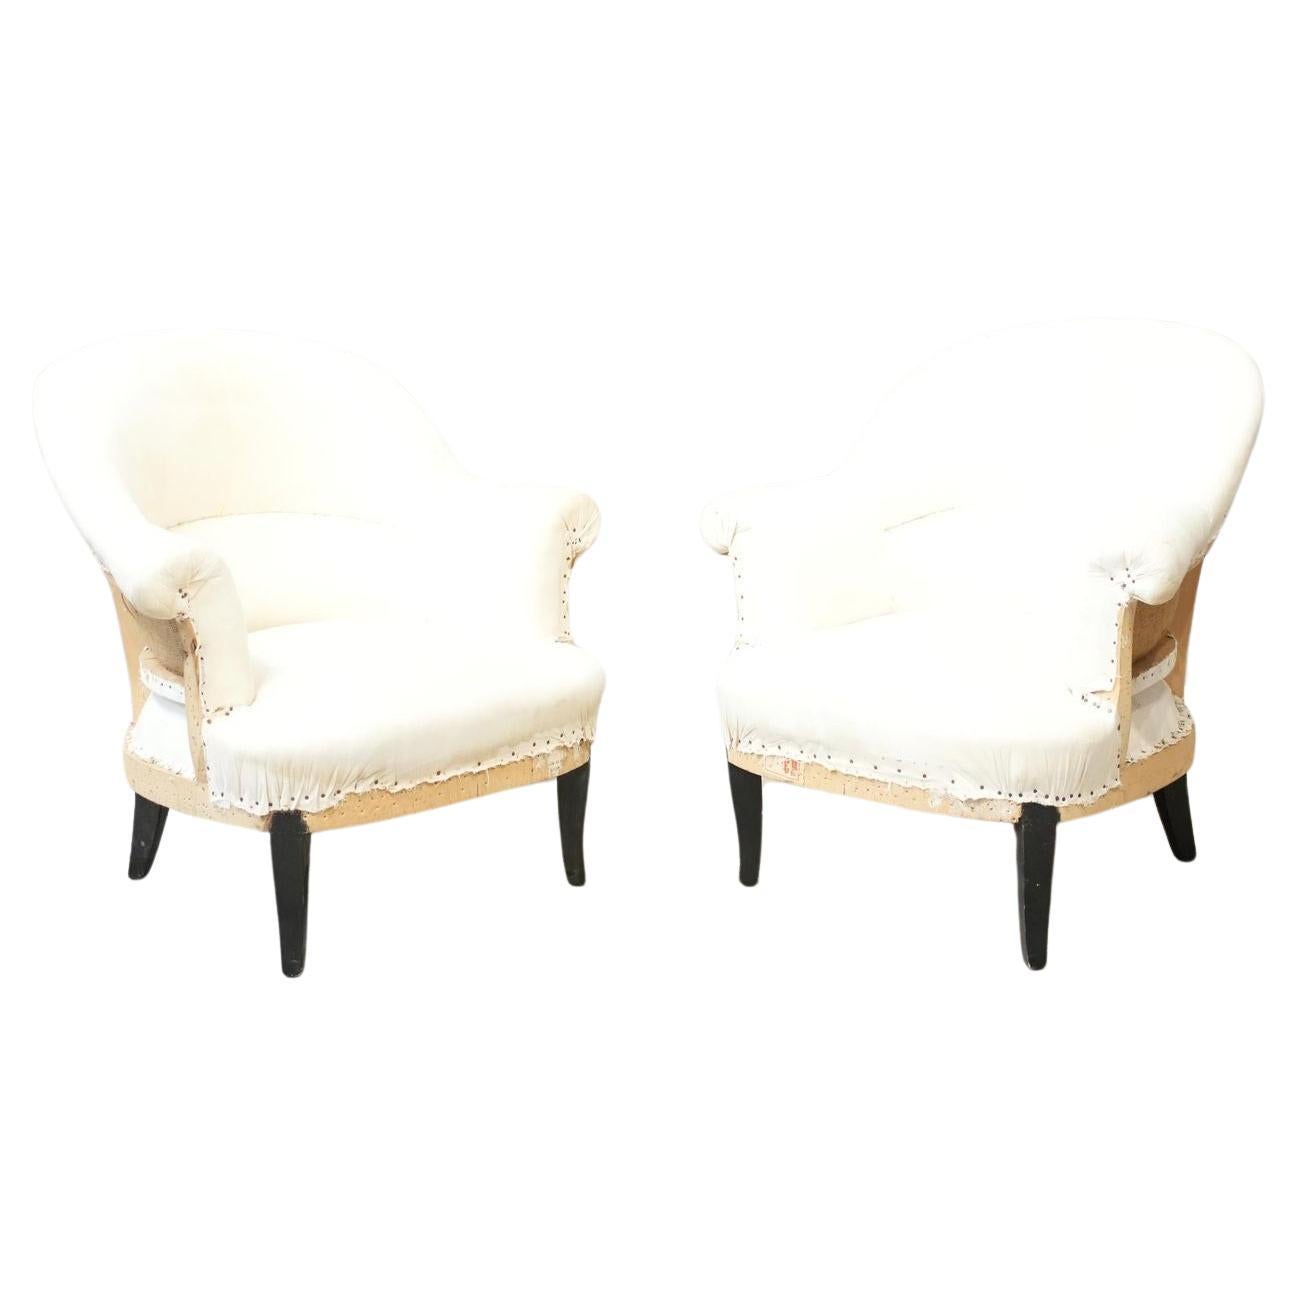 Pair of 1920's French tub chairs